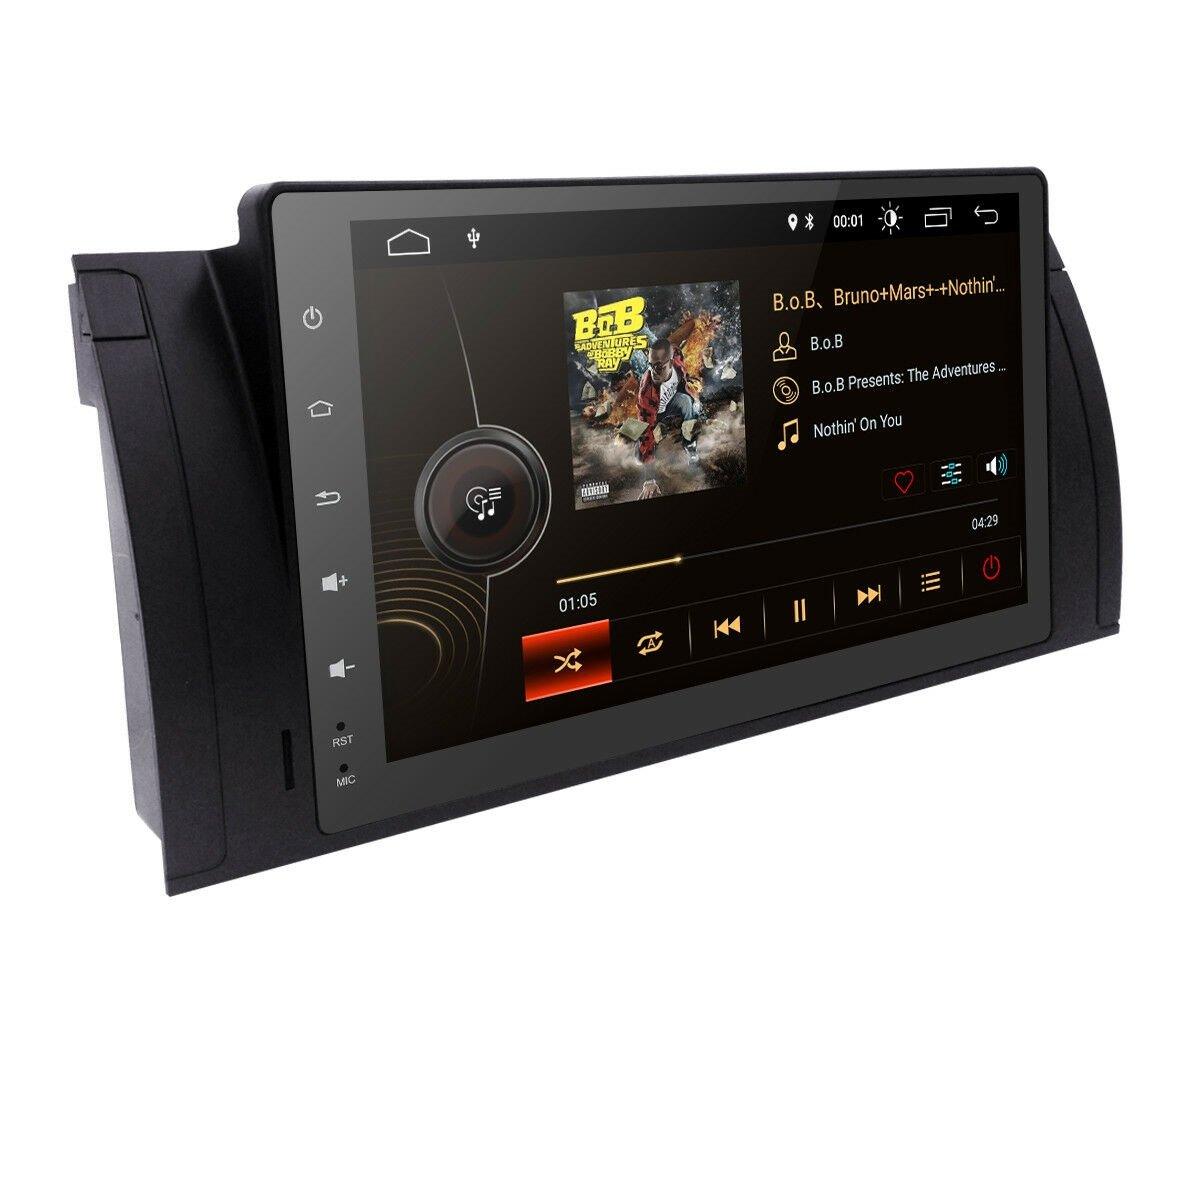 9" Octa-Core Android Navigation Radio for BMW 5 Series  M5  2000 - 2003 - Smart Car Stereo Radio Navigation | In-Dash audio/video players online - Phoenix Automotive